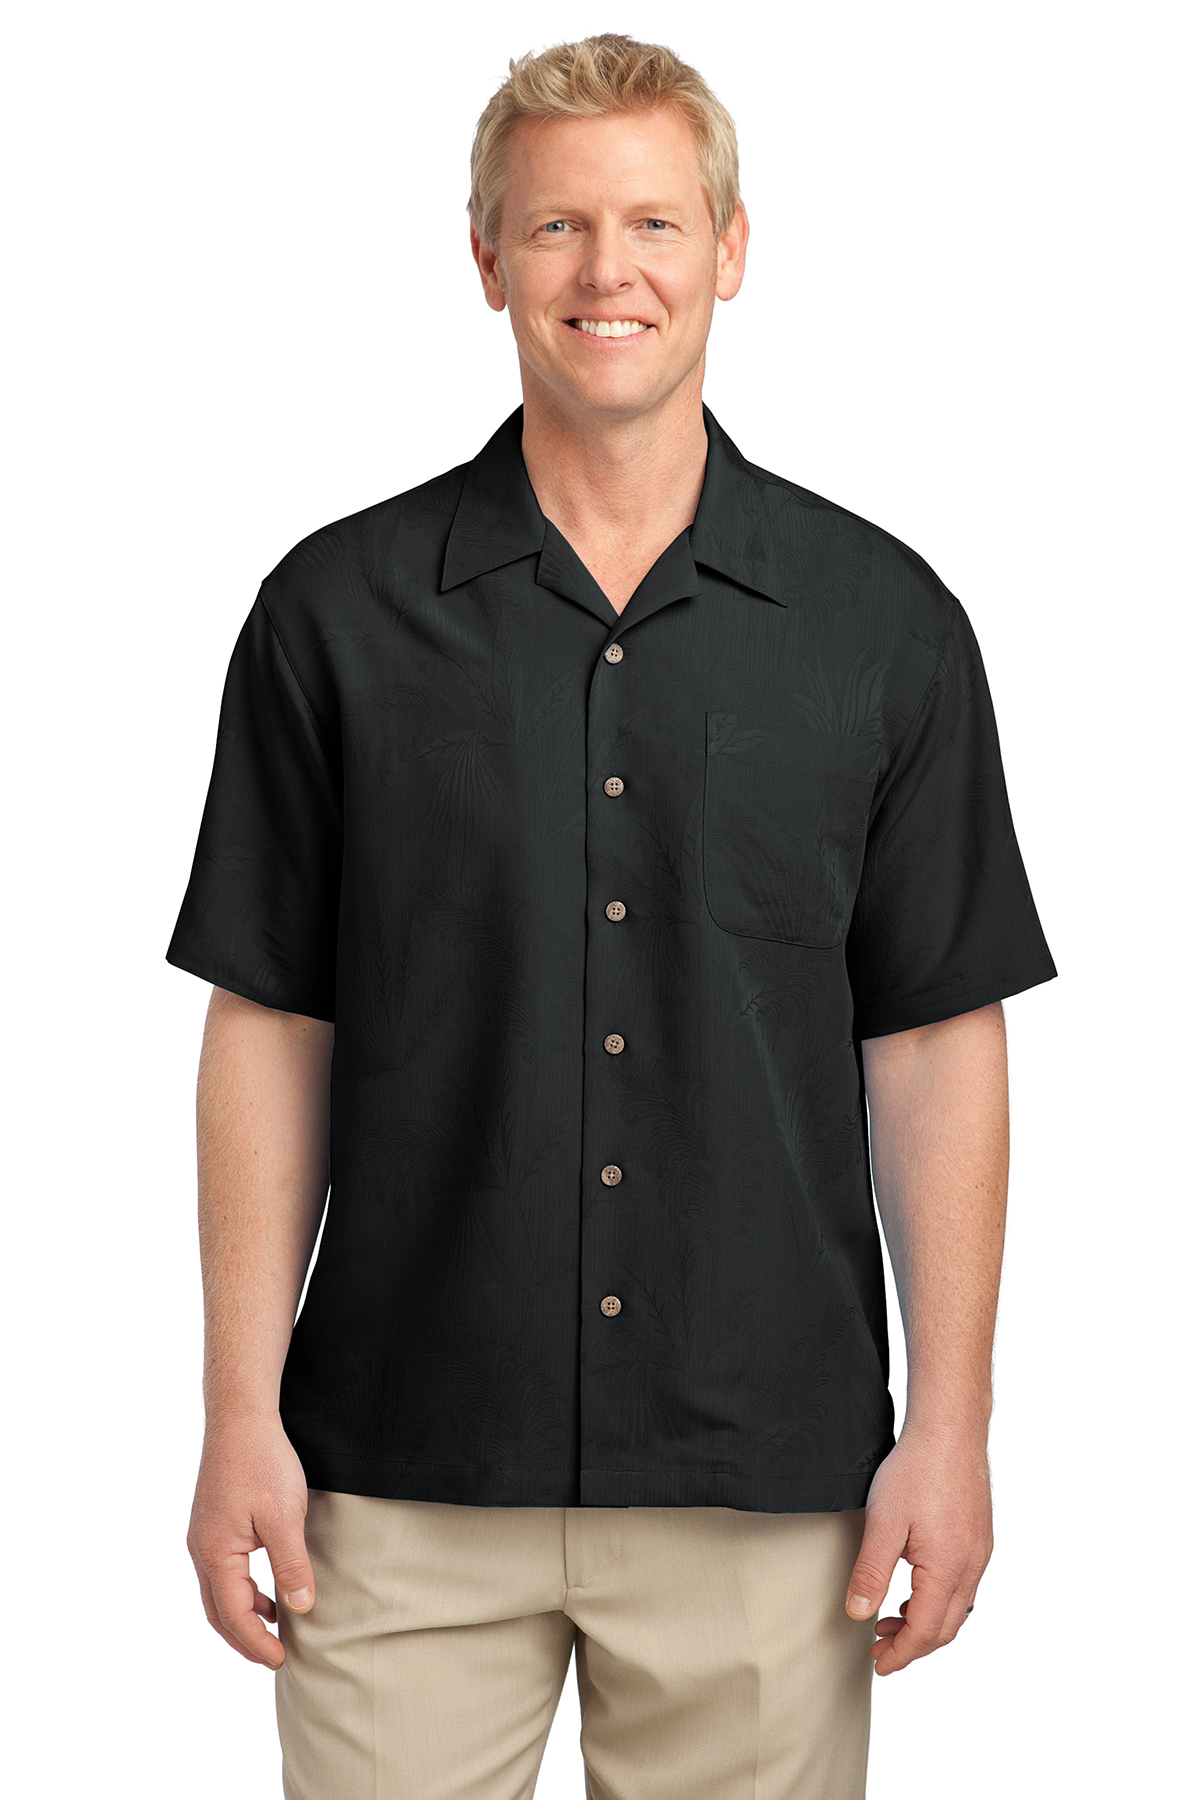 Port Authority Patterned Easy Care Camp Shirt | Product | SanMar